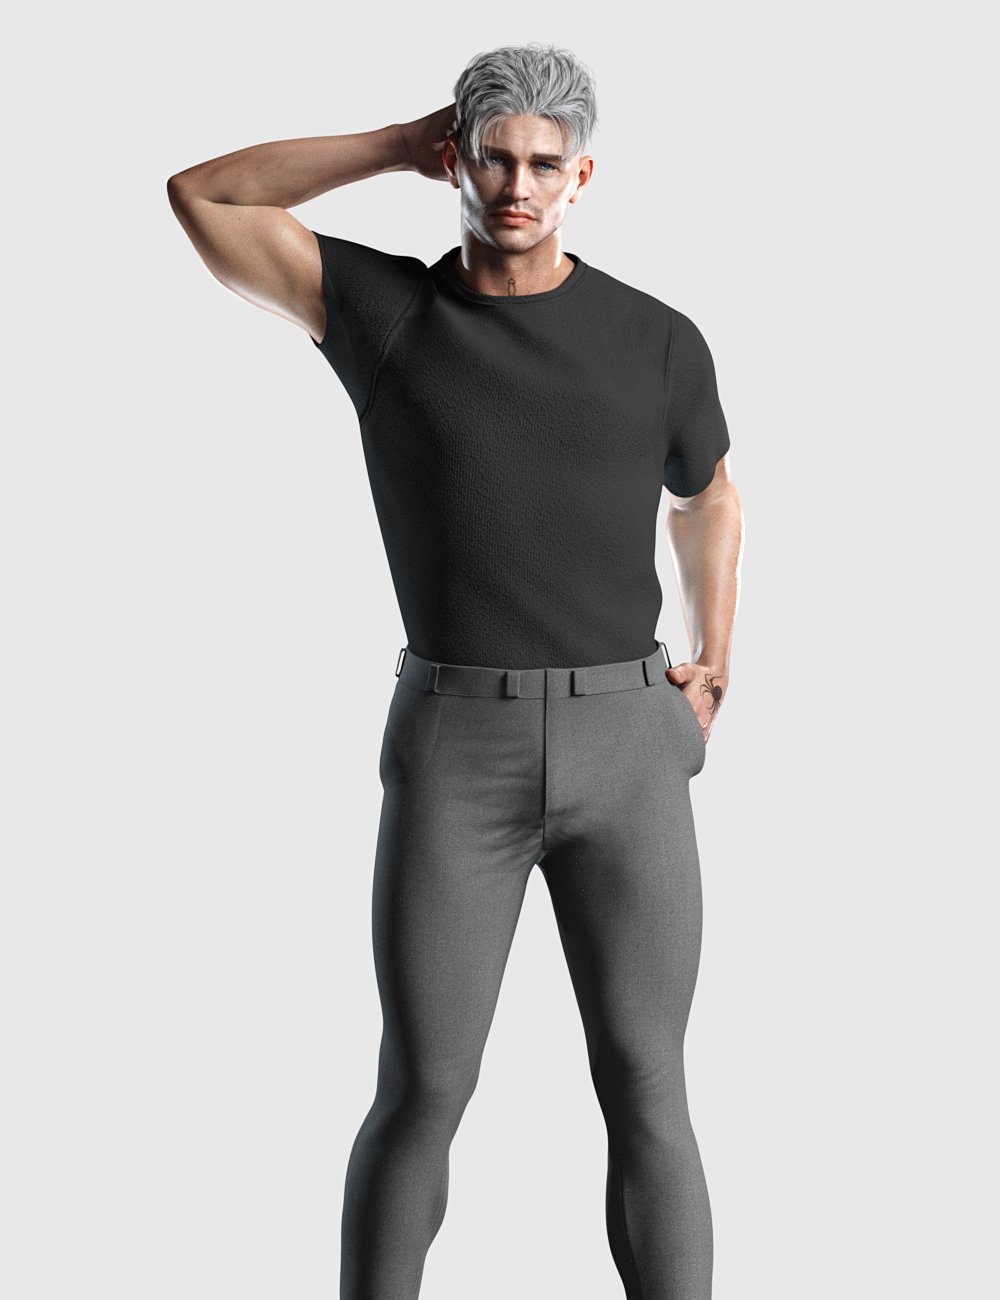 Dforce服 半袖ｔシャツと ピチピチパンツ Dforce Tucked Tee Outfit For Genesis 8 And 8 1 Males Dazカテゴリ一覧